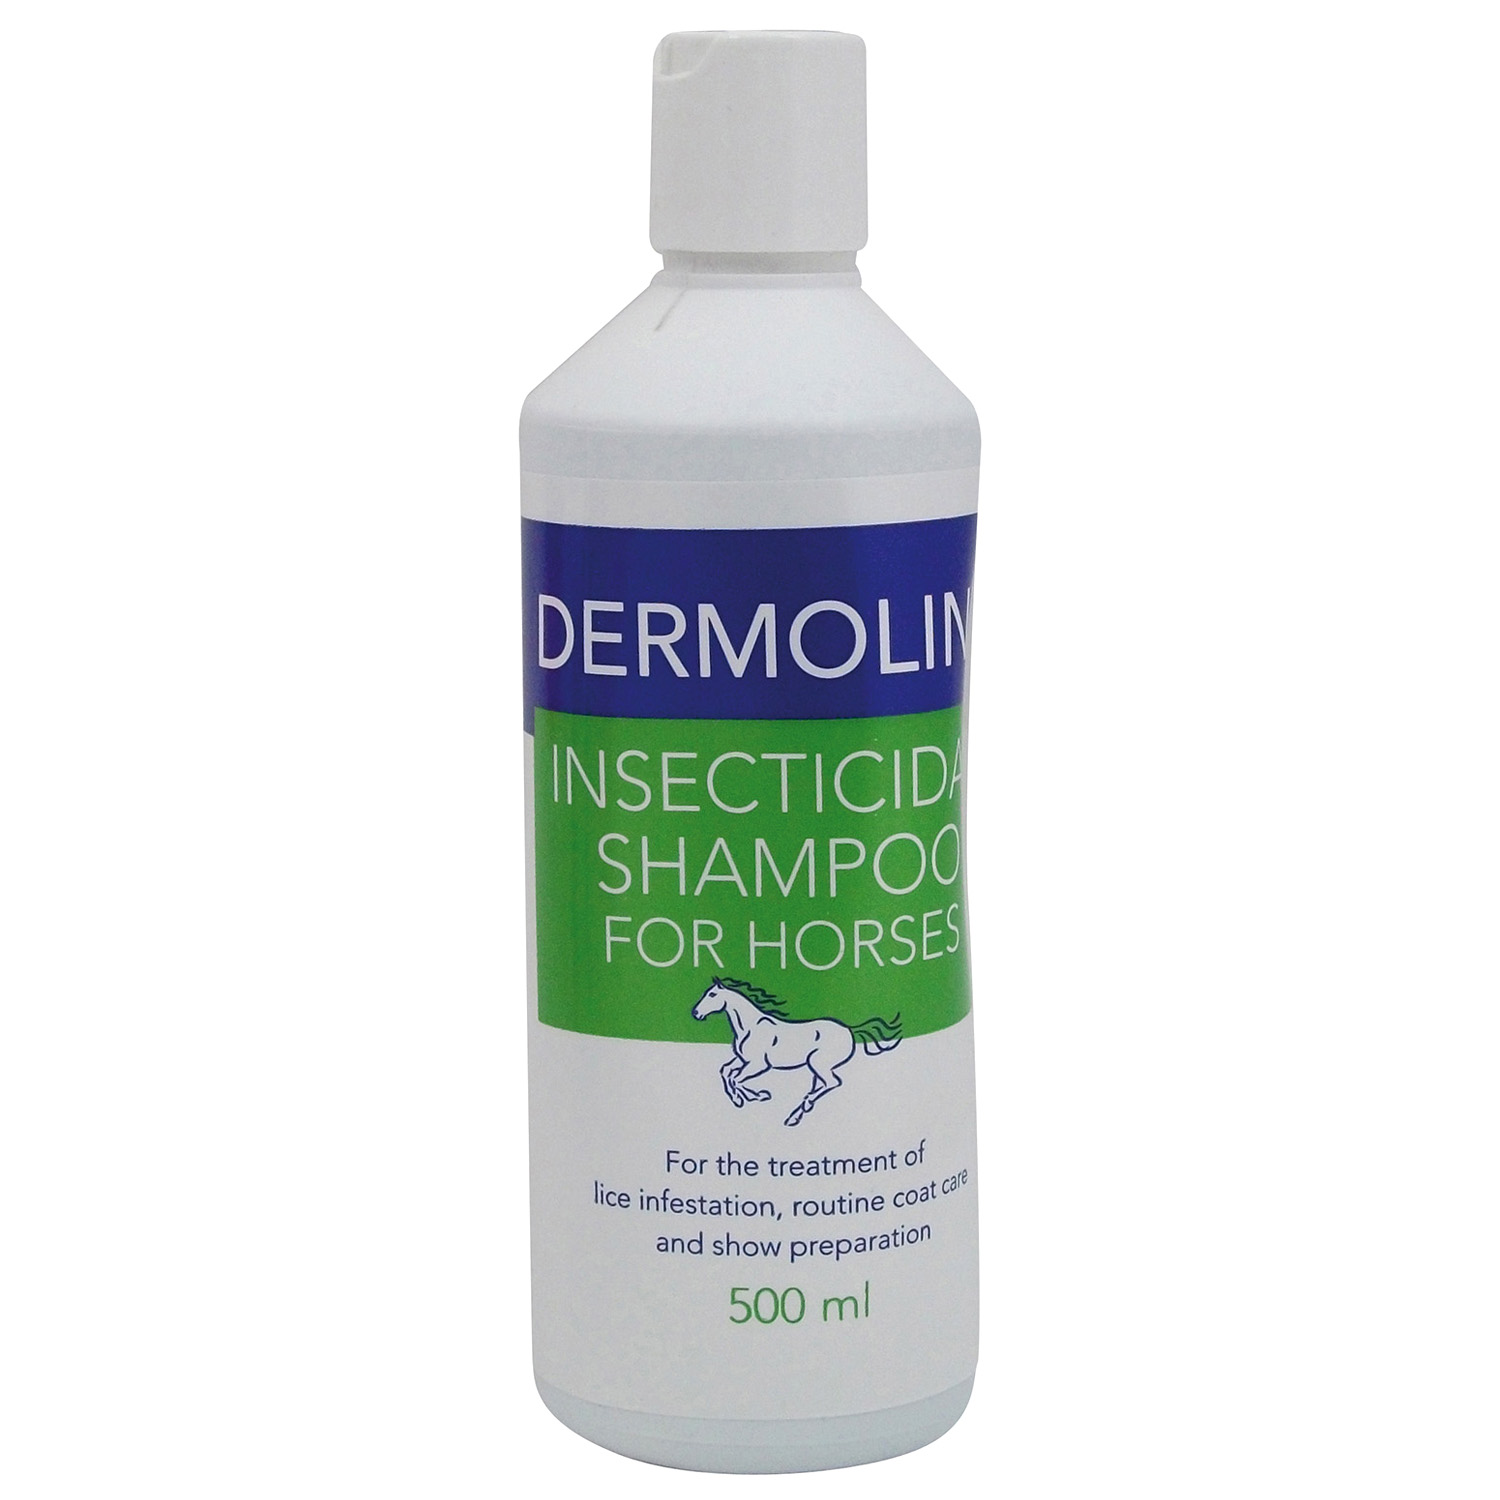 DERMOLINE INSECT SHAMPOO FOR HORSES DERMOLINE INSECT SHAMPOO FOR HORSES 500 ML  500 ML